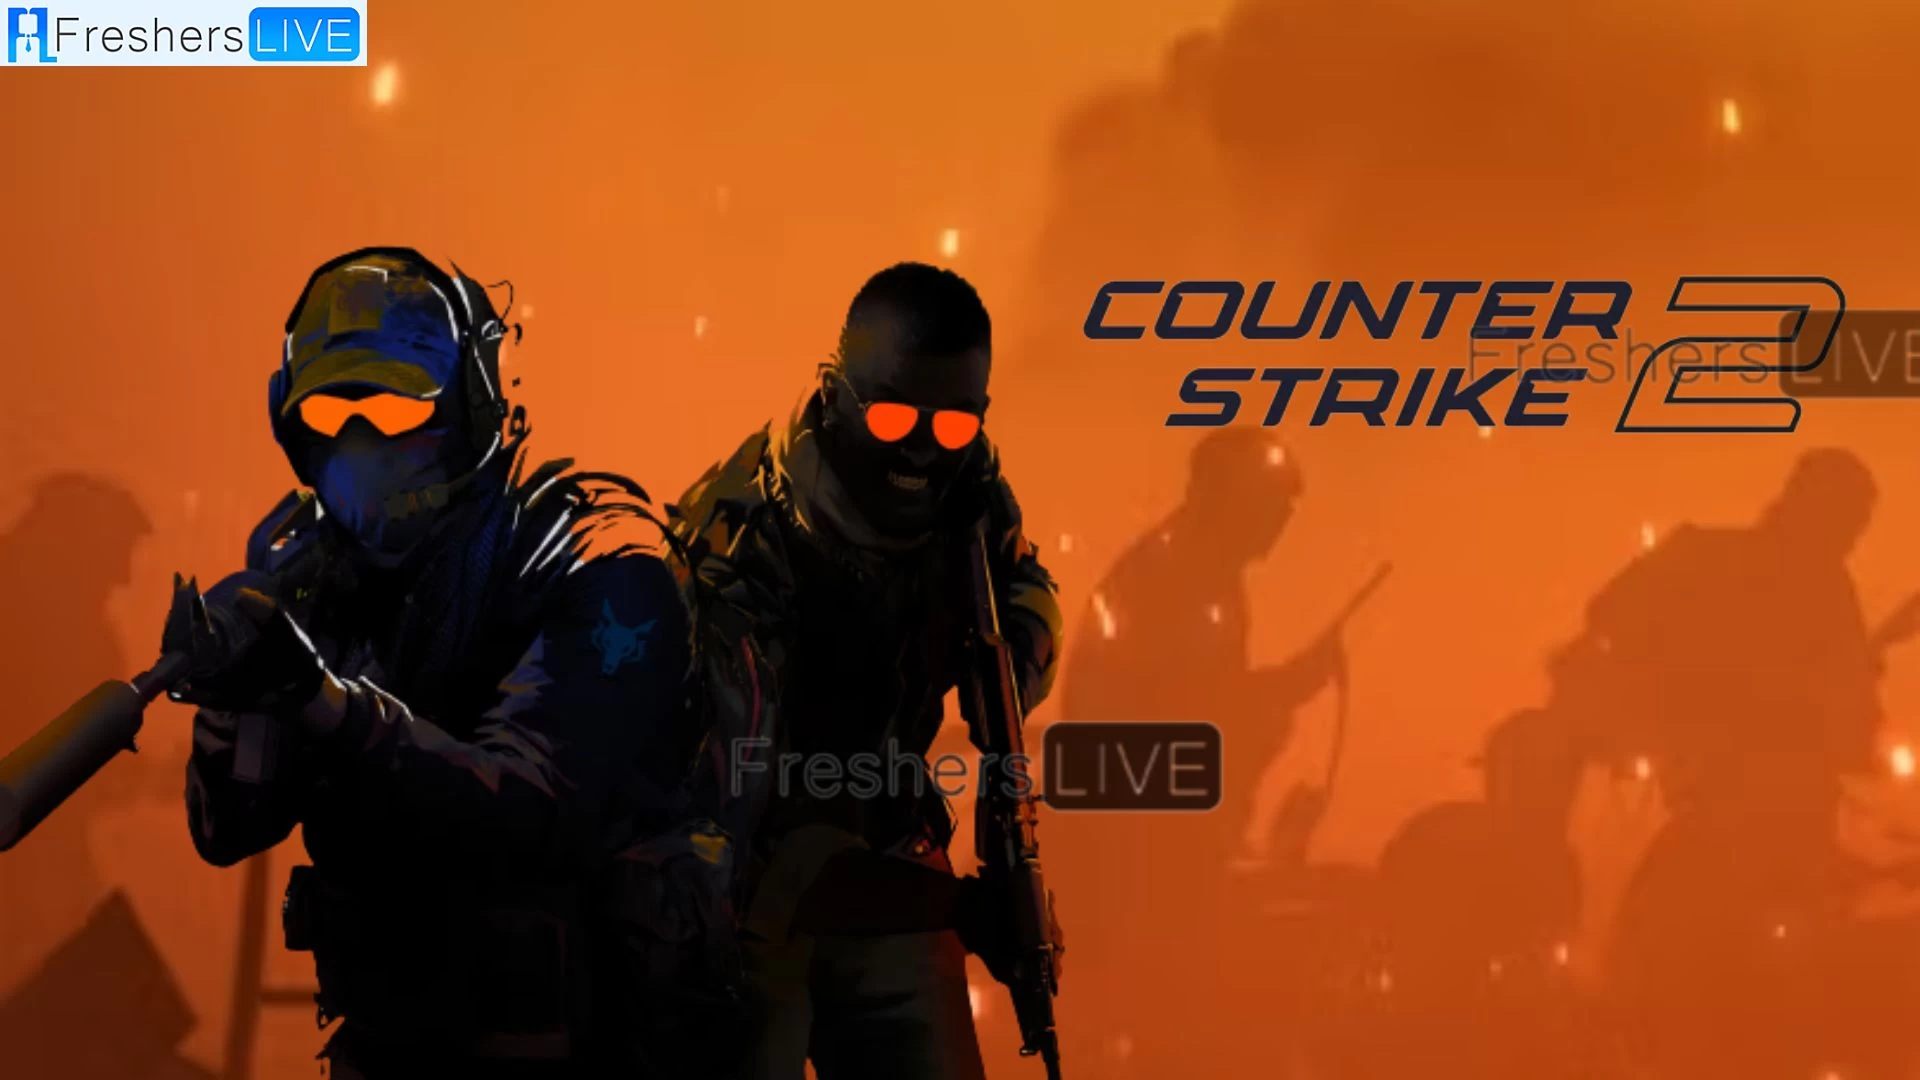 When Will Counter Strike 2 Be Released? Counter Strike 2 Release Date and Time